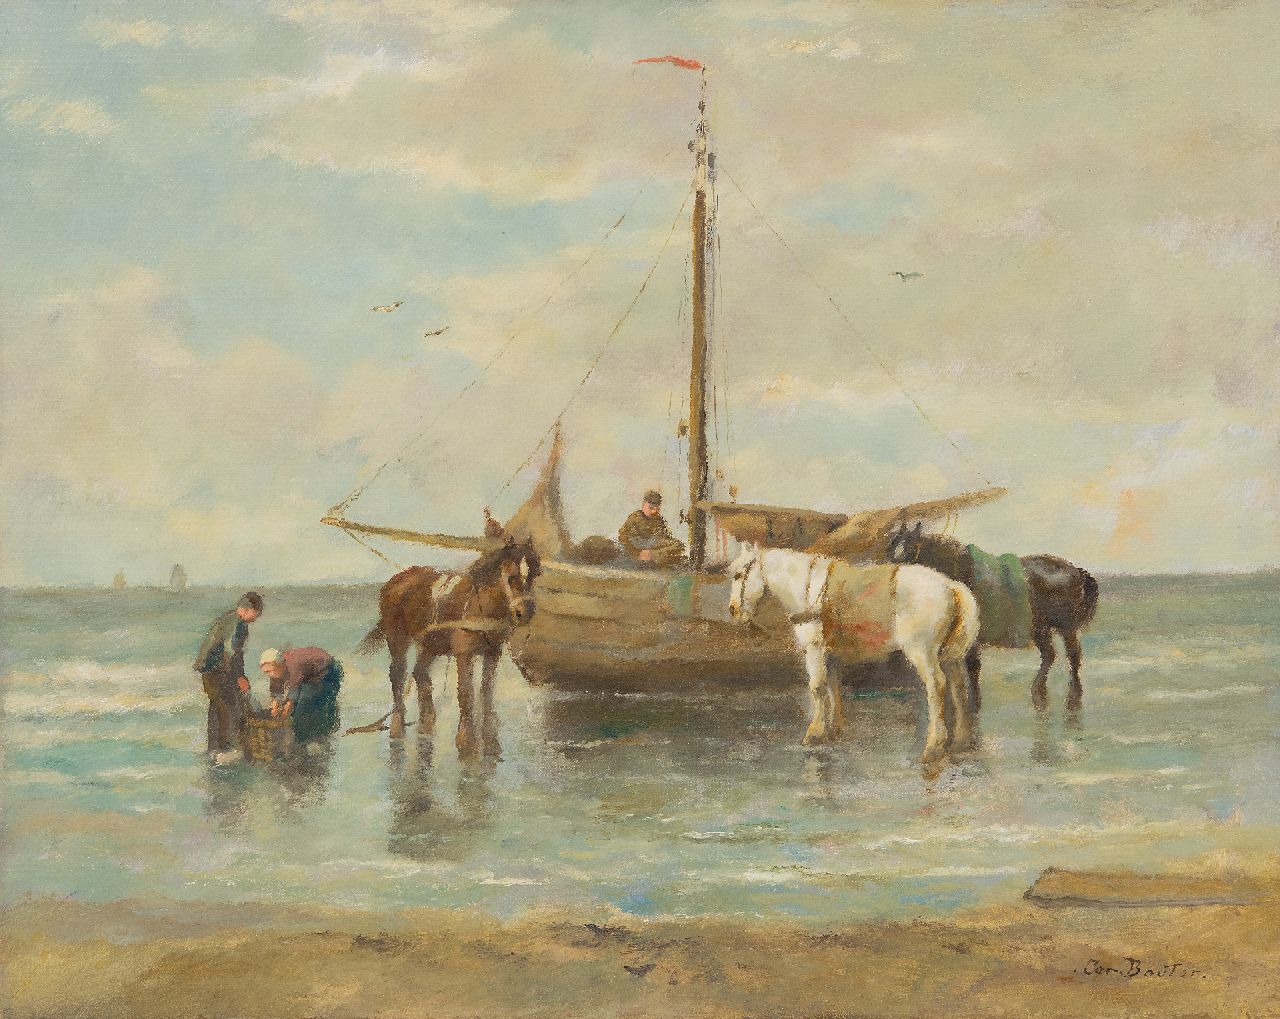 Cor Bouter | Return of the fishermen, oil on canvas, 41.0 x 51.1 cm, signed l.r.